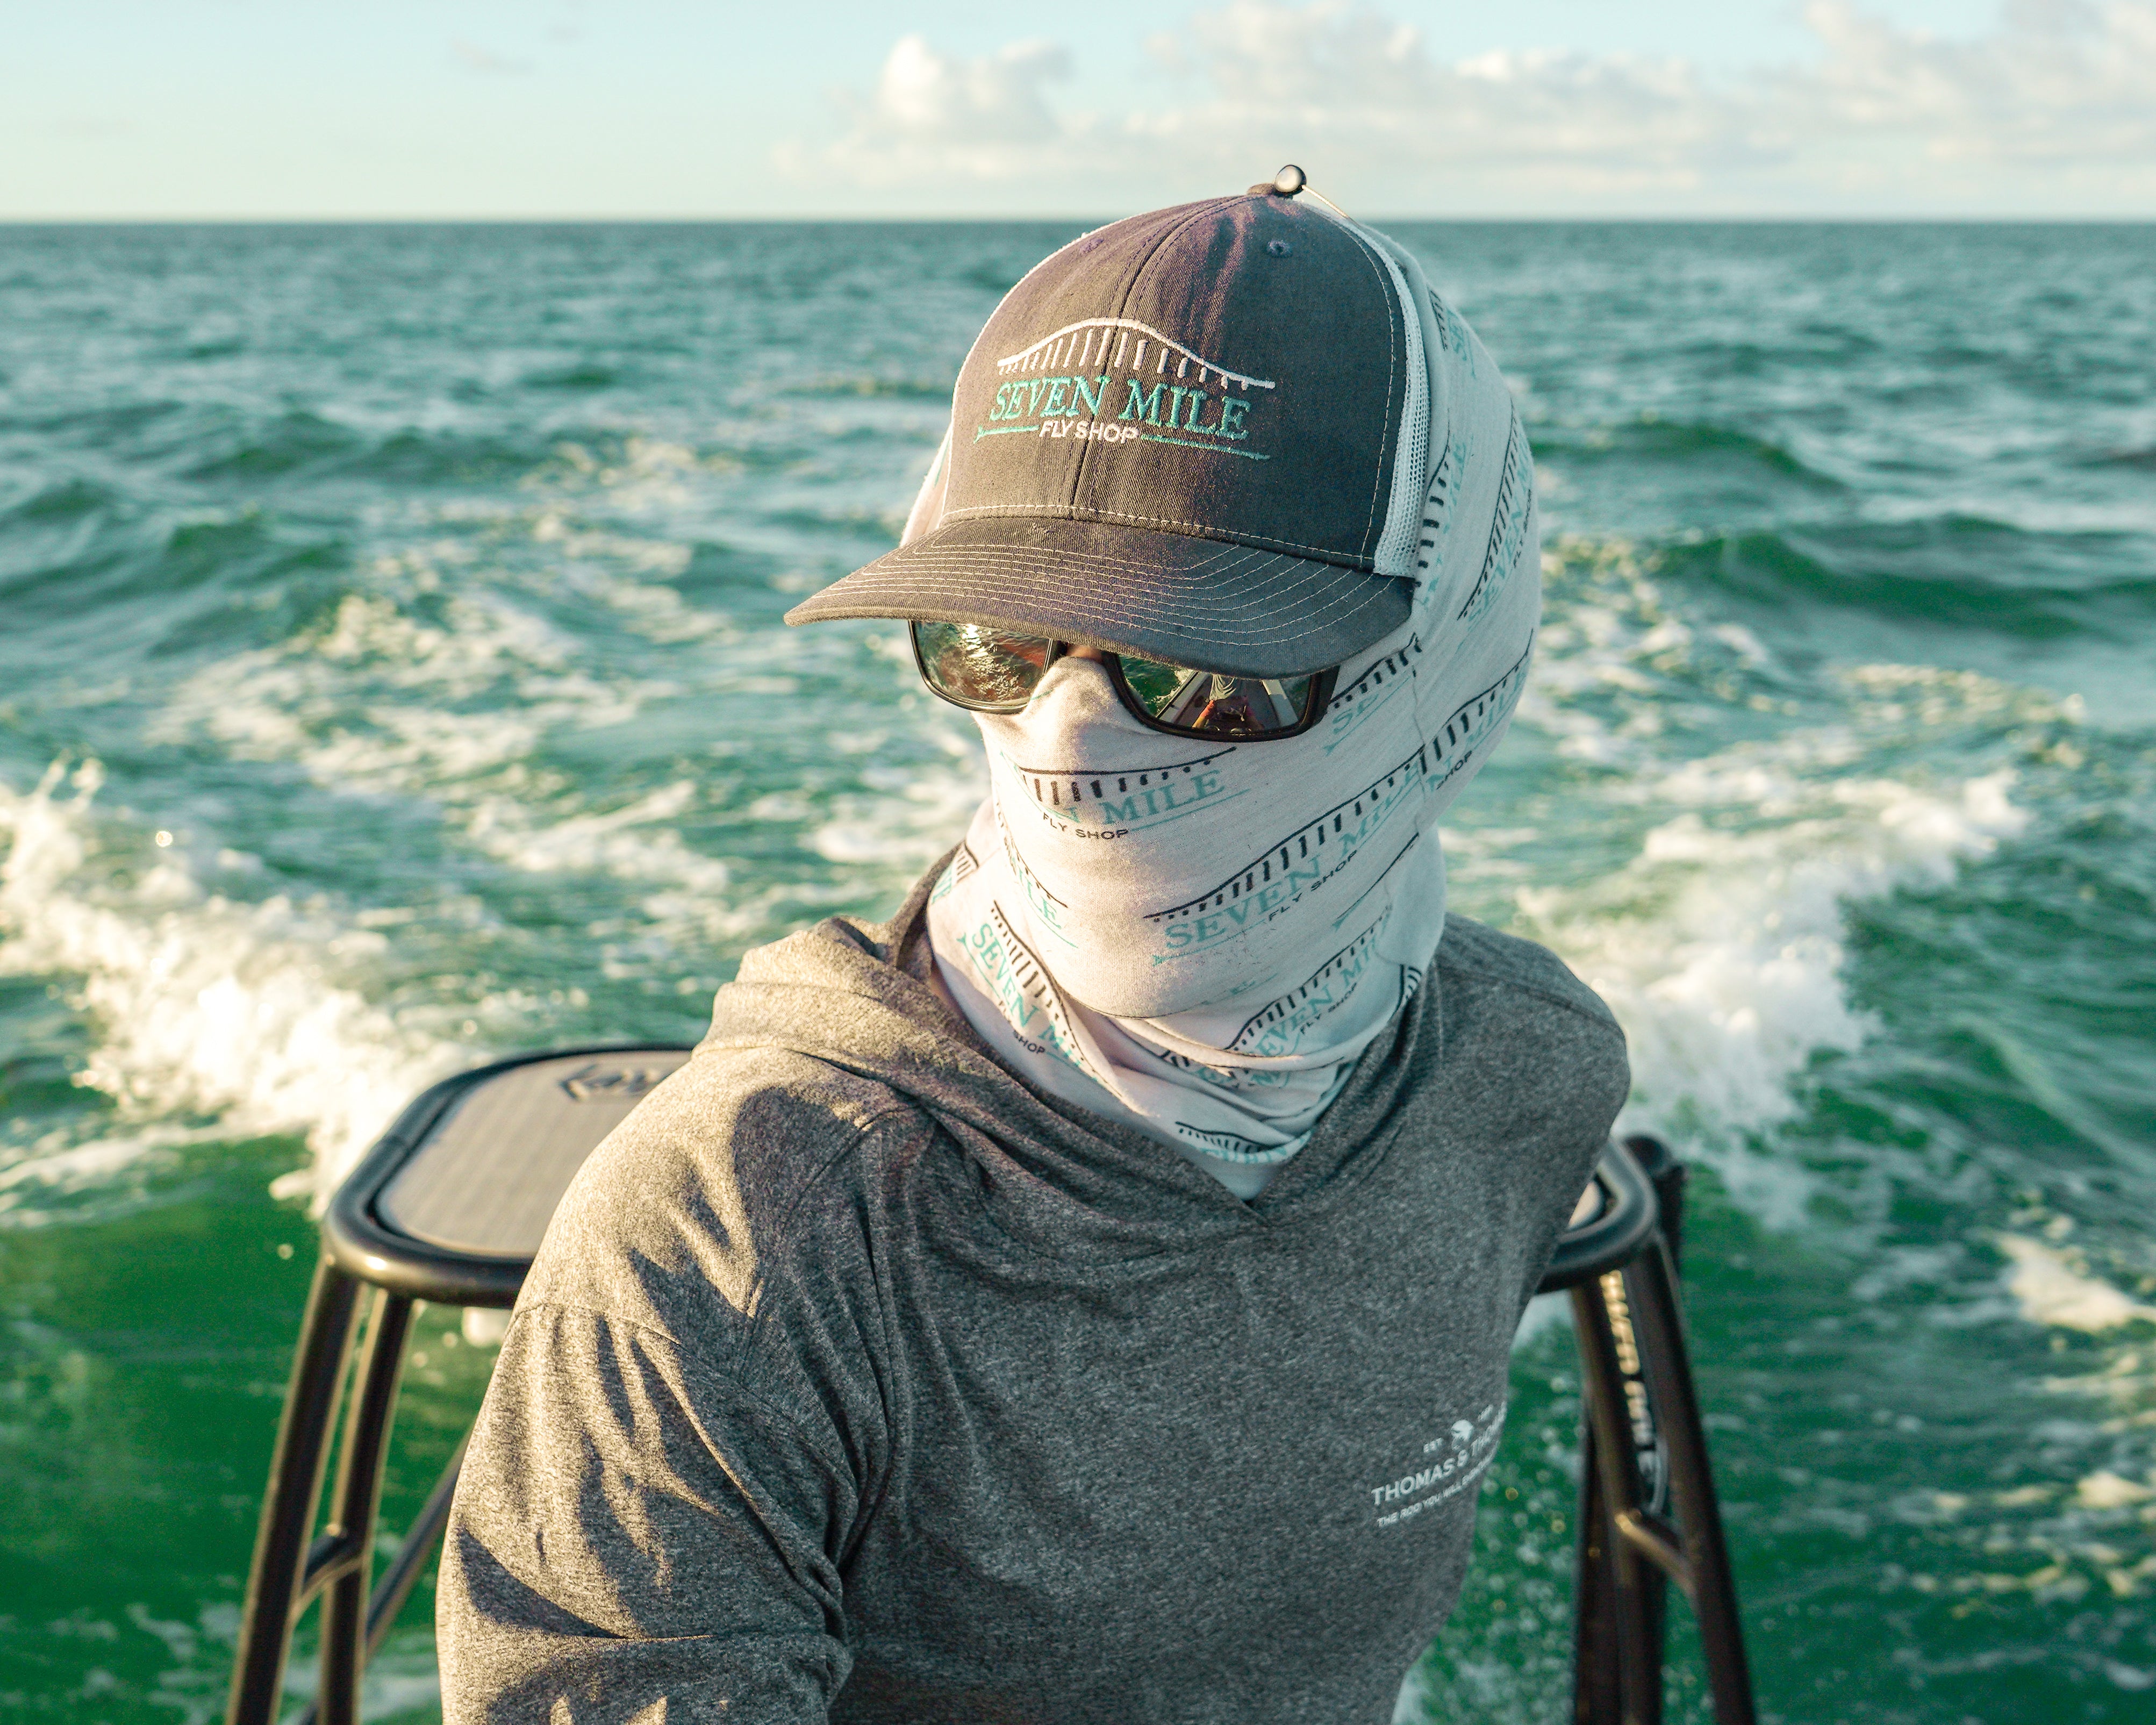 SALTWATER FLY FISHING – Seven Mile Fly Shop